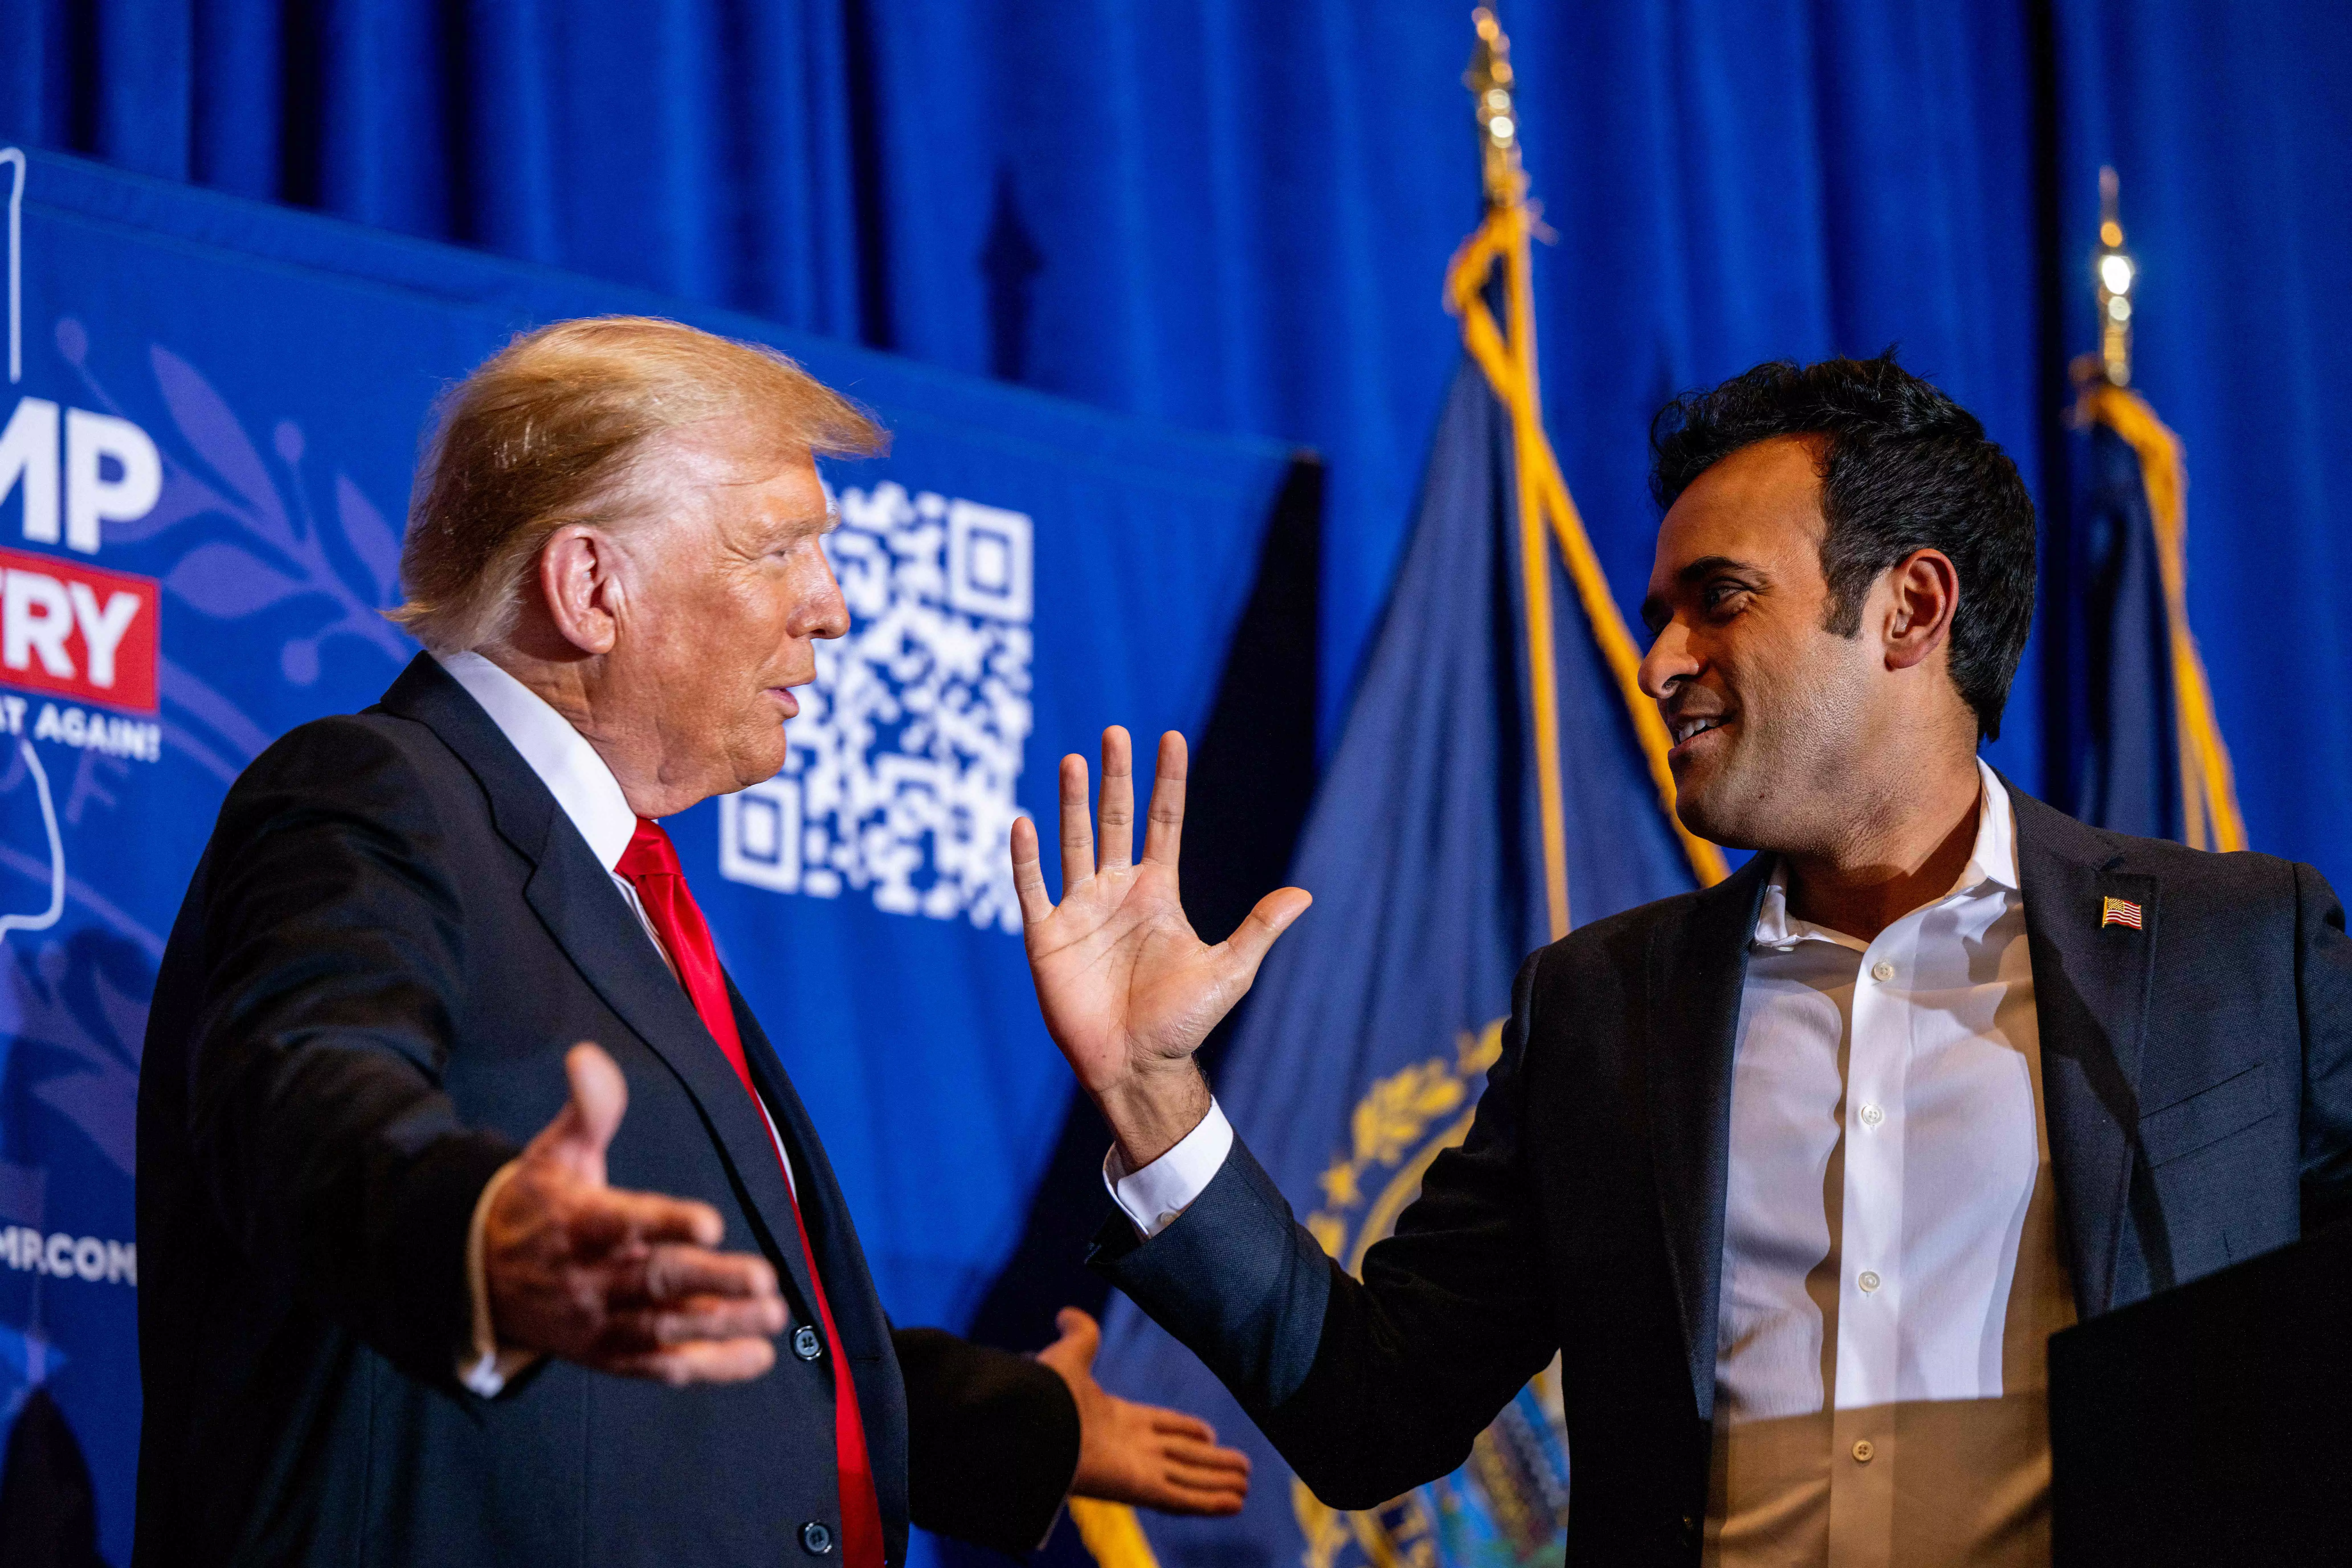 Hes gonna be working with us for a long time: Trump thanks Ramaswamy for endorsement